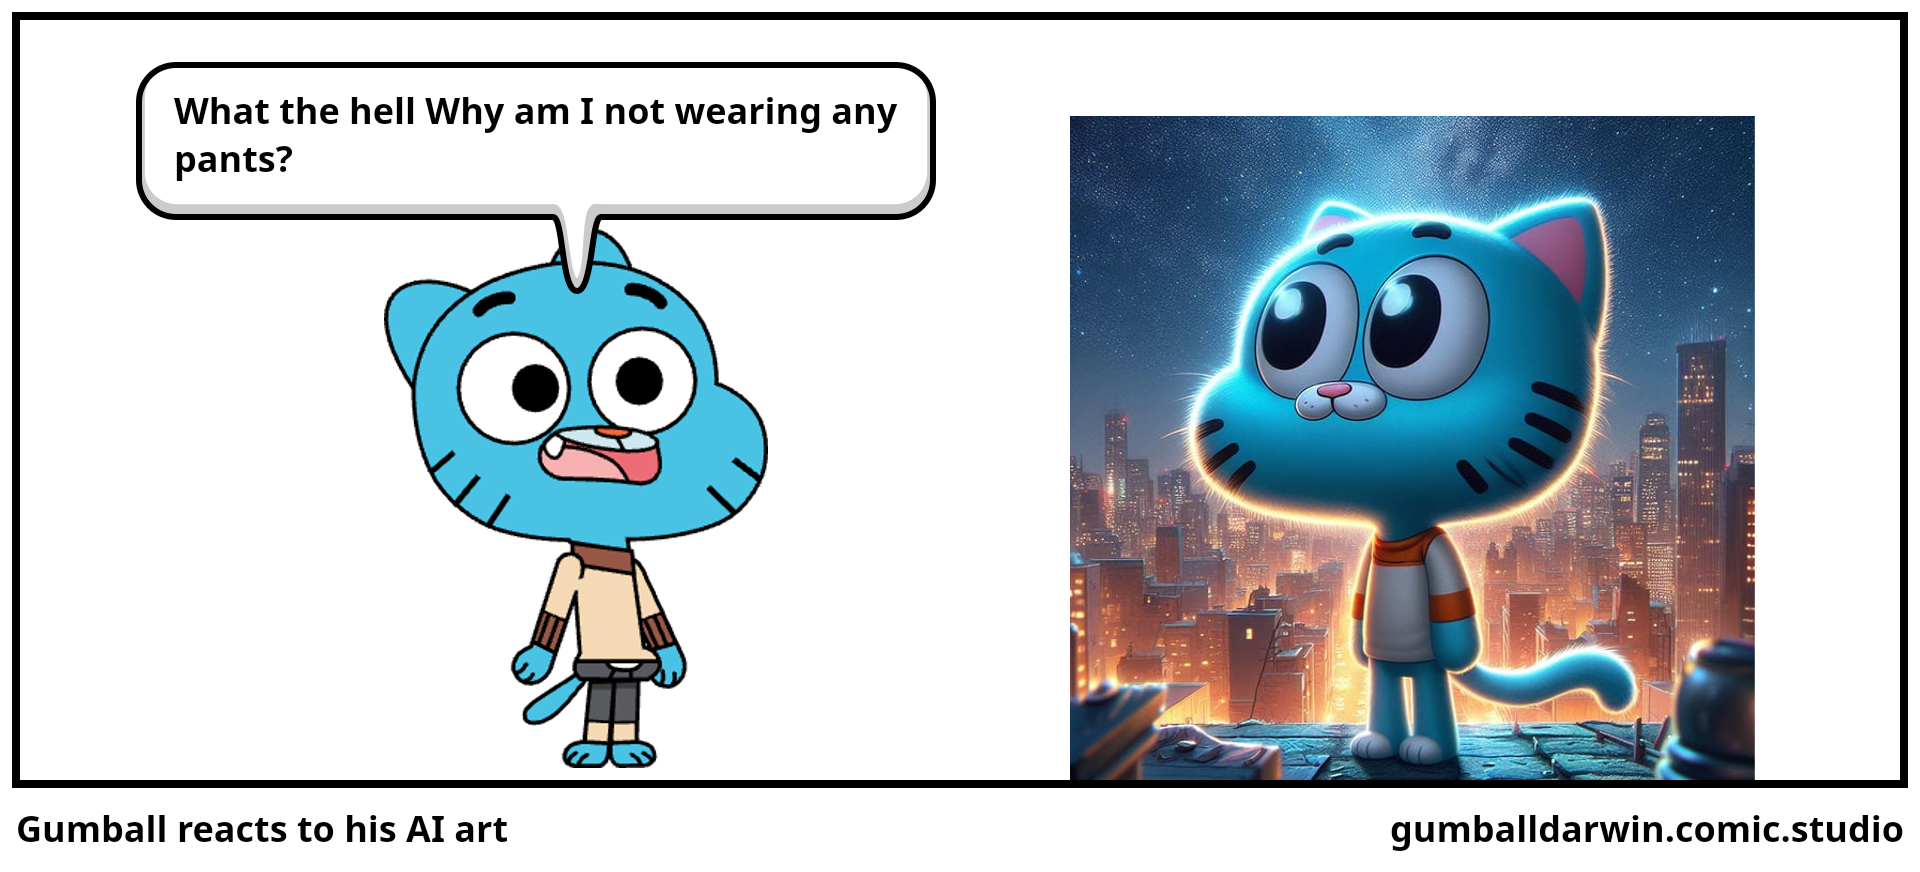 Gumball reacts to his AI art